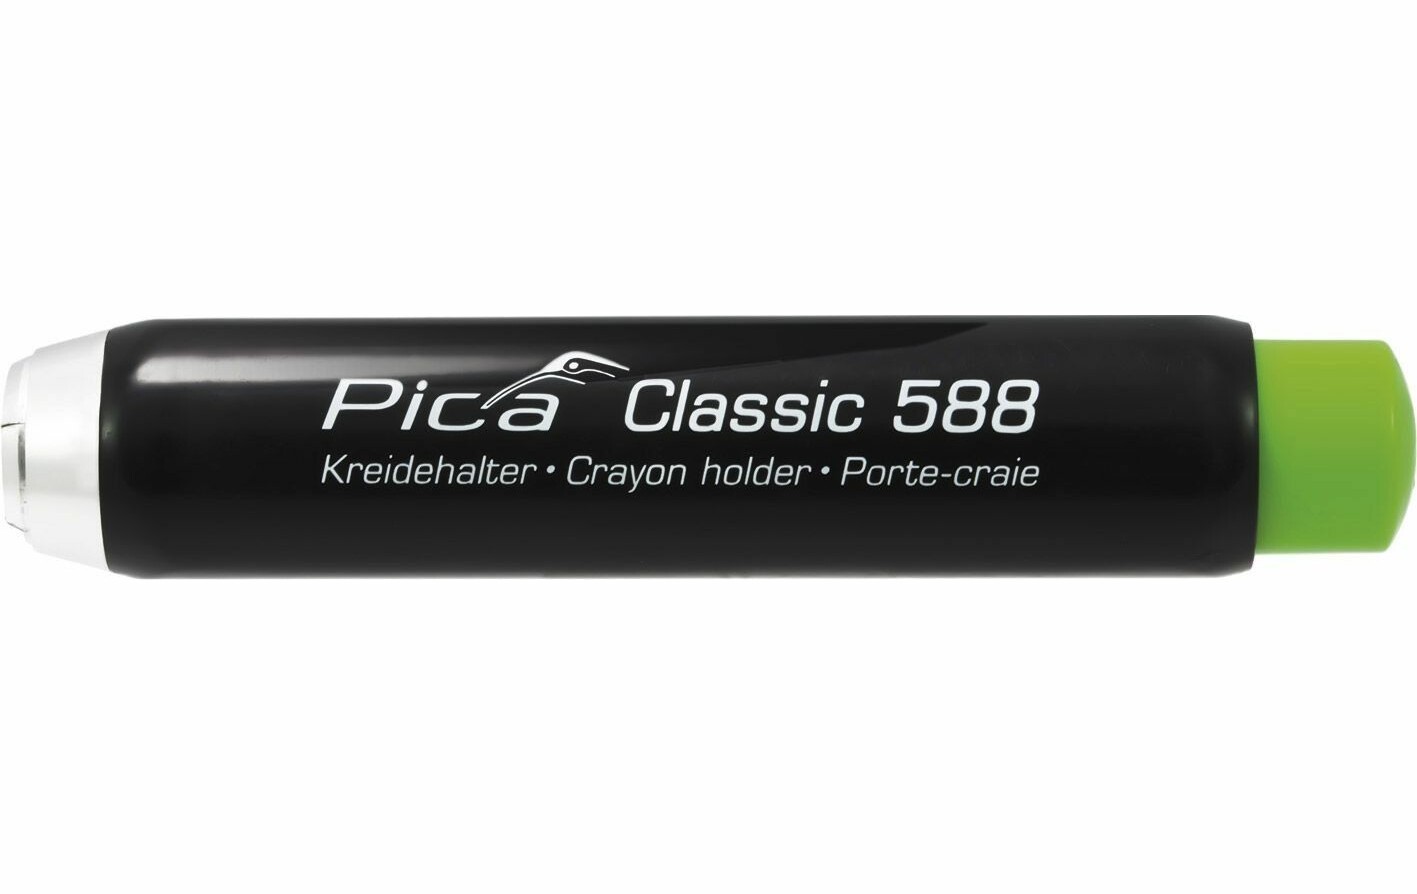 Pica Classic 588 Crayon Holder 